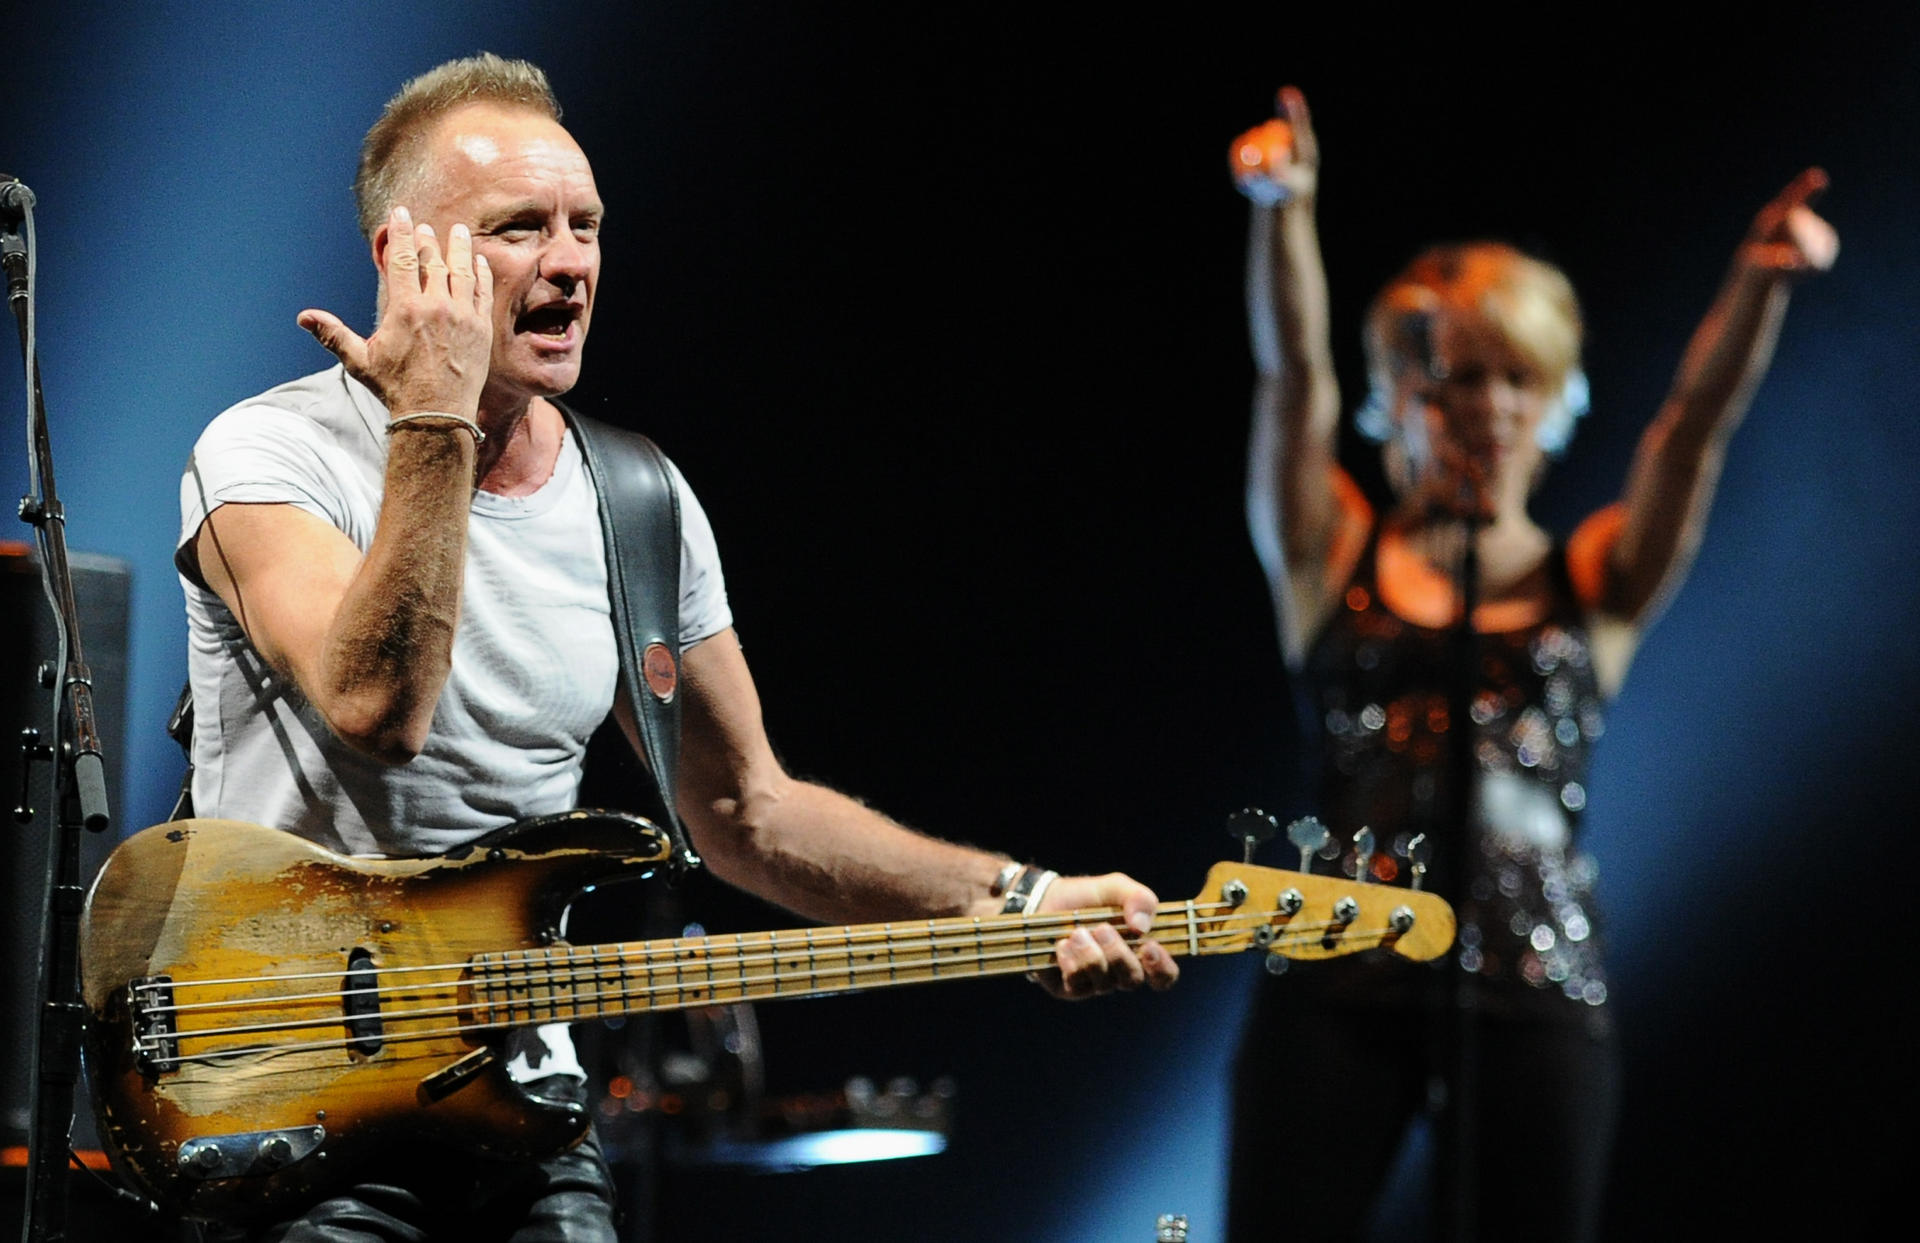 Sting's love for music making has not diminished. Photo: Itar-Tass